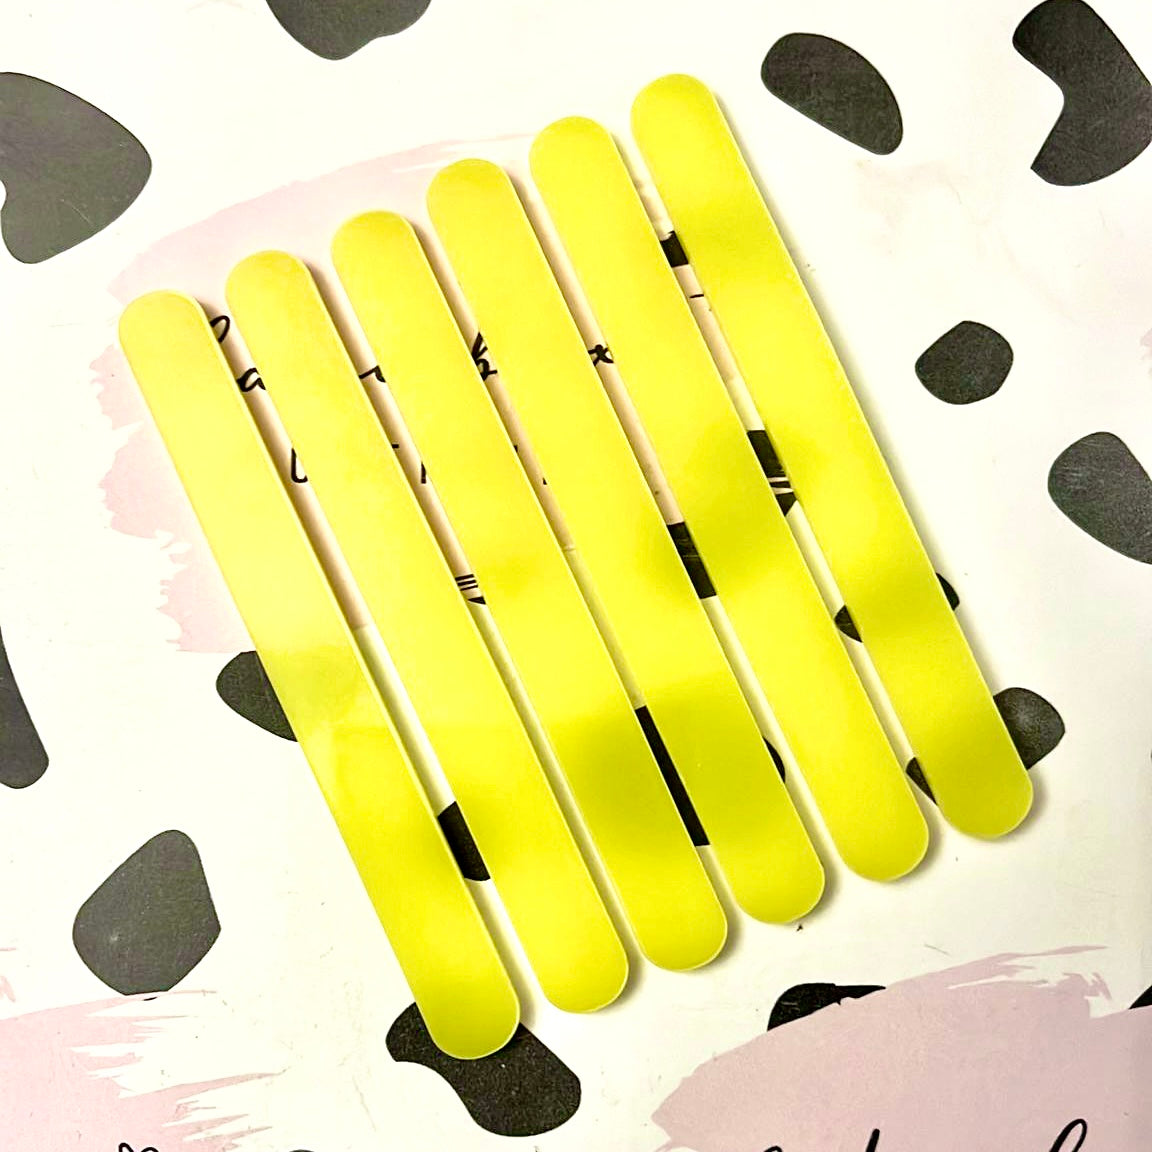 YELLOW CAKESICLE STICKS - PACK OF 6